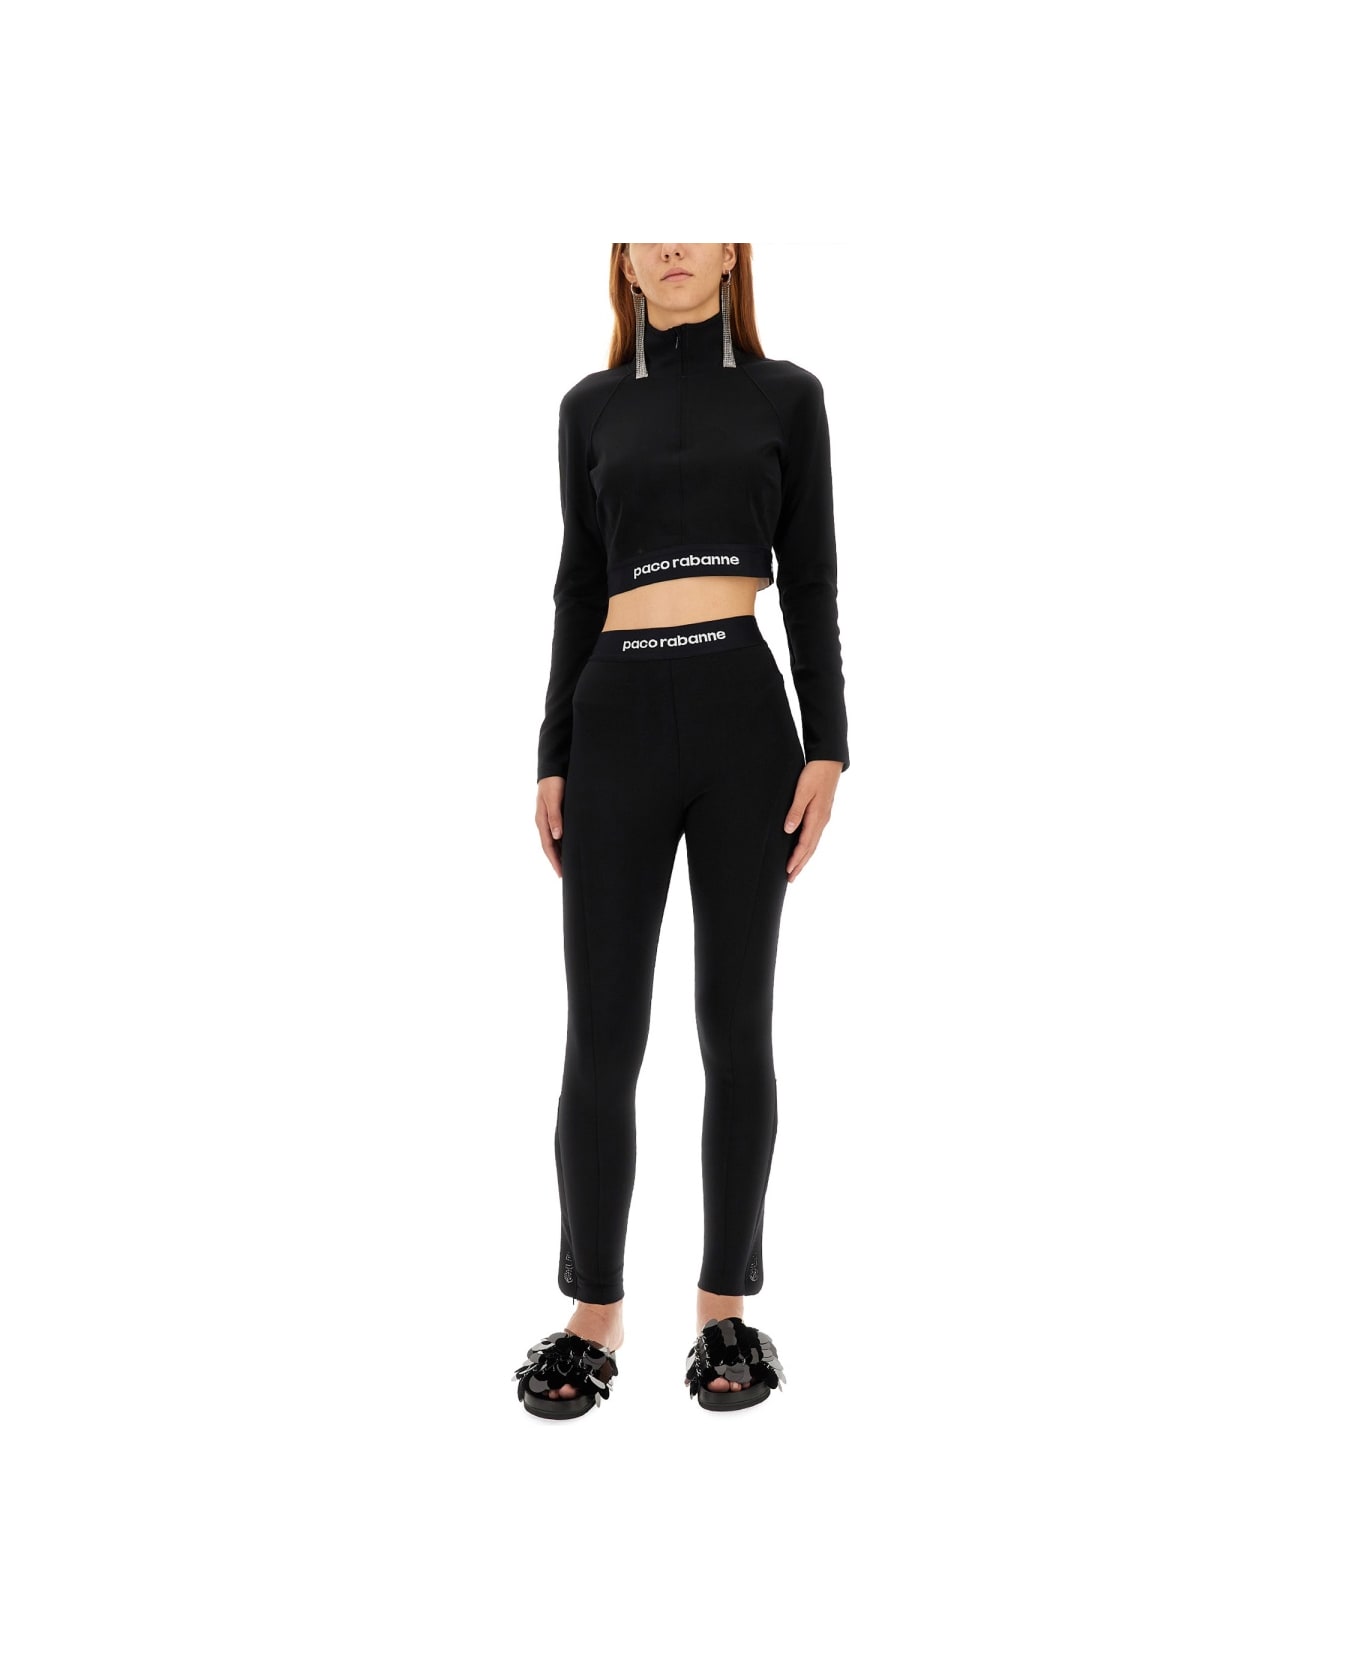 Paco Rabanne Top Cropped - BLACK